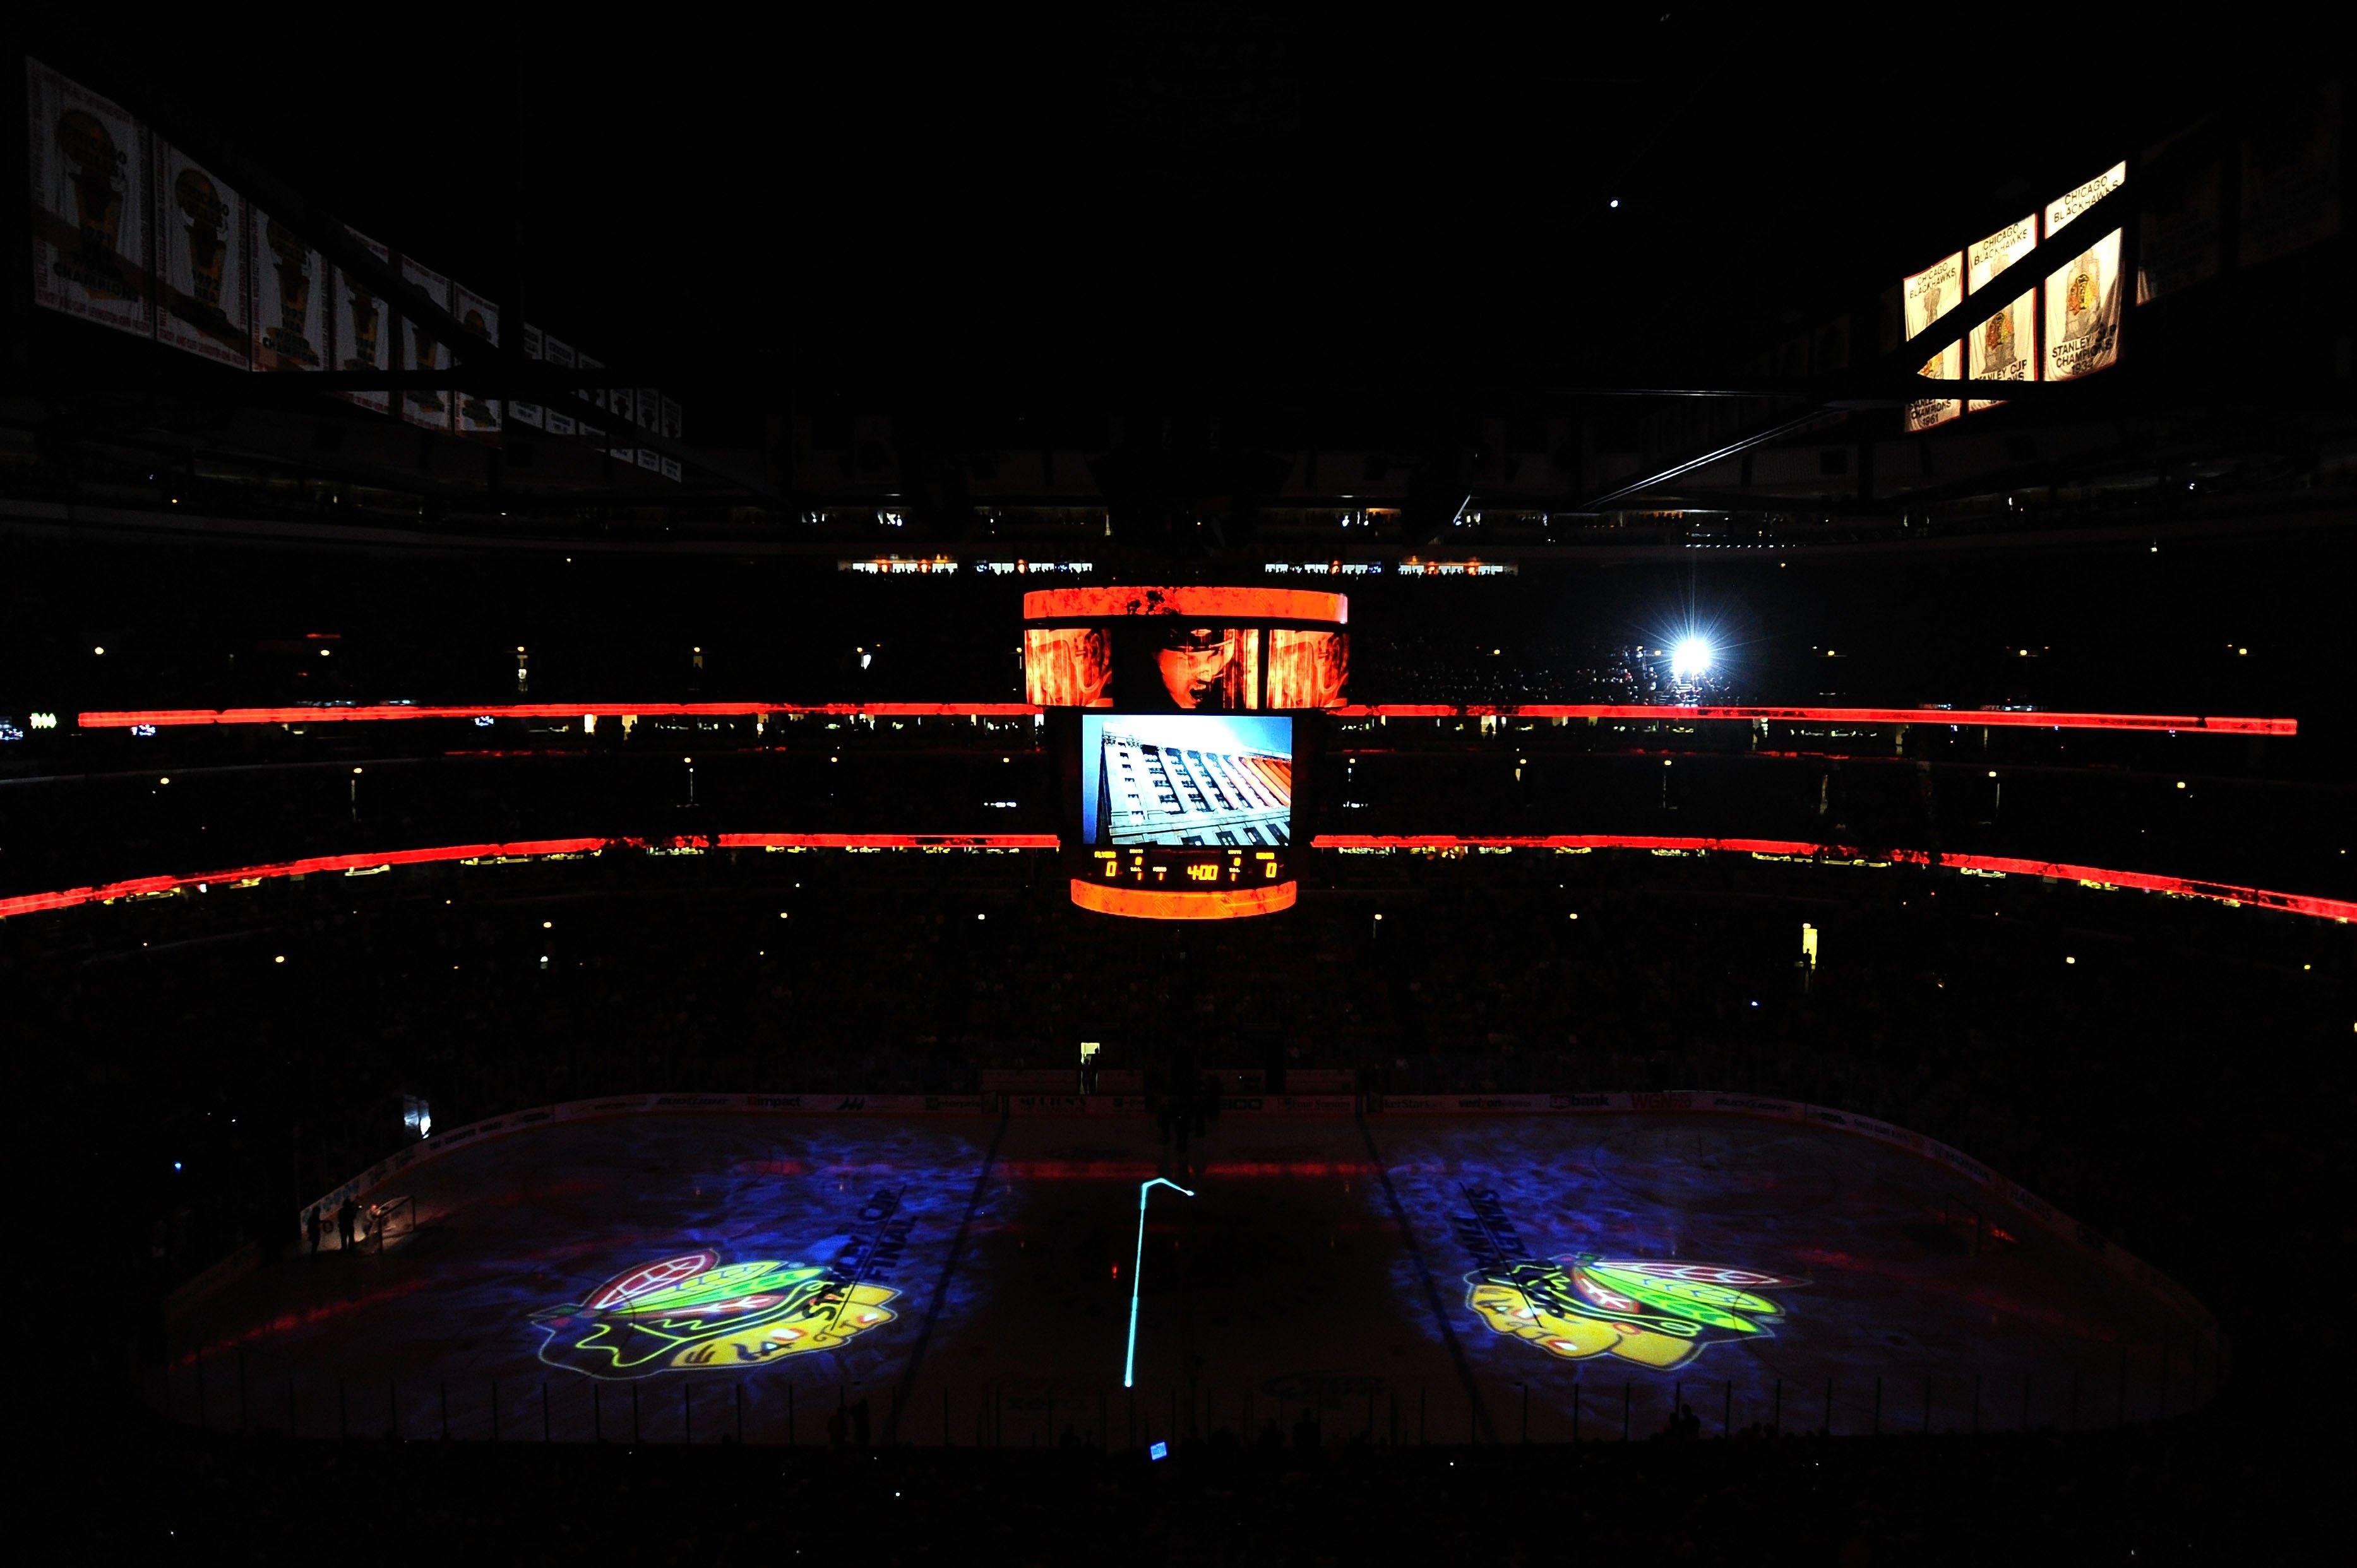 CHICAGO - MAY 31:  A general view inside the United Center before Game Two of the 2010 NHL Stanley Cup Final between the Chicago Blackhawks and the Philadelphia Flyers on May 31, 2010 in Chicago, Illinois.  (Photo by Michael Heiman/Getty Images)